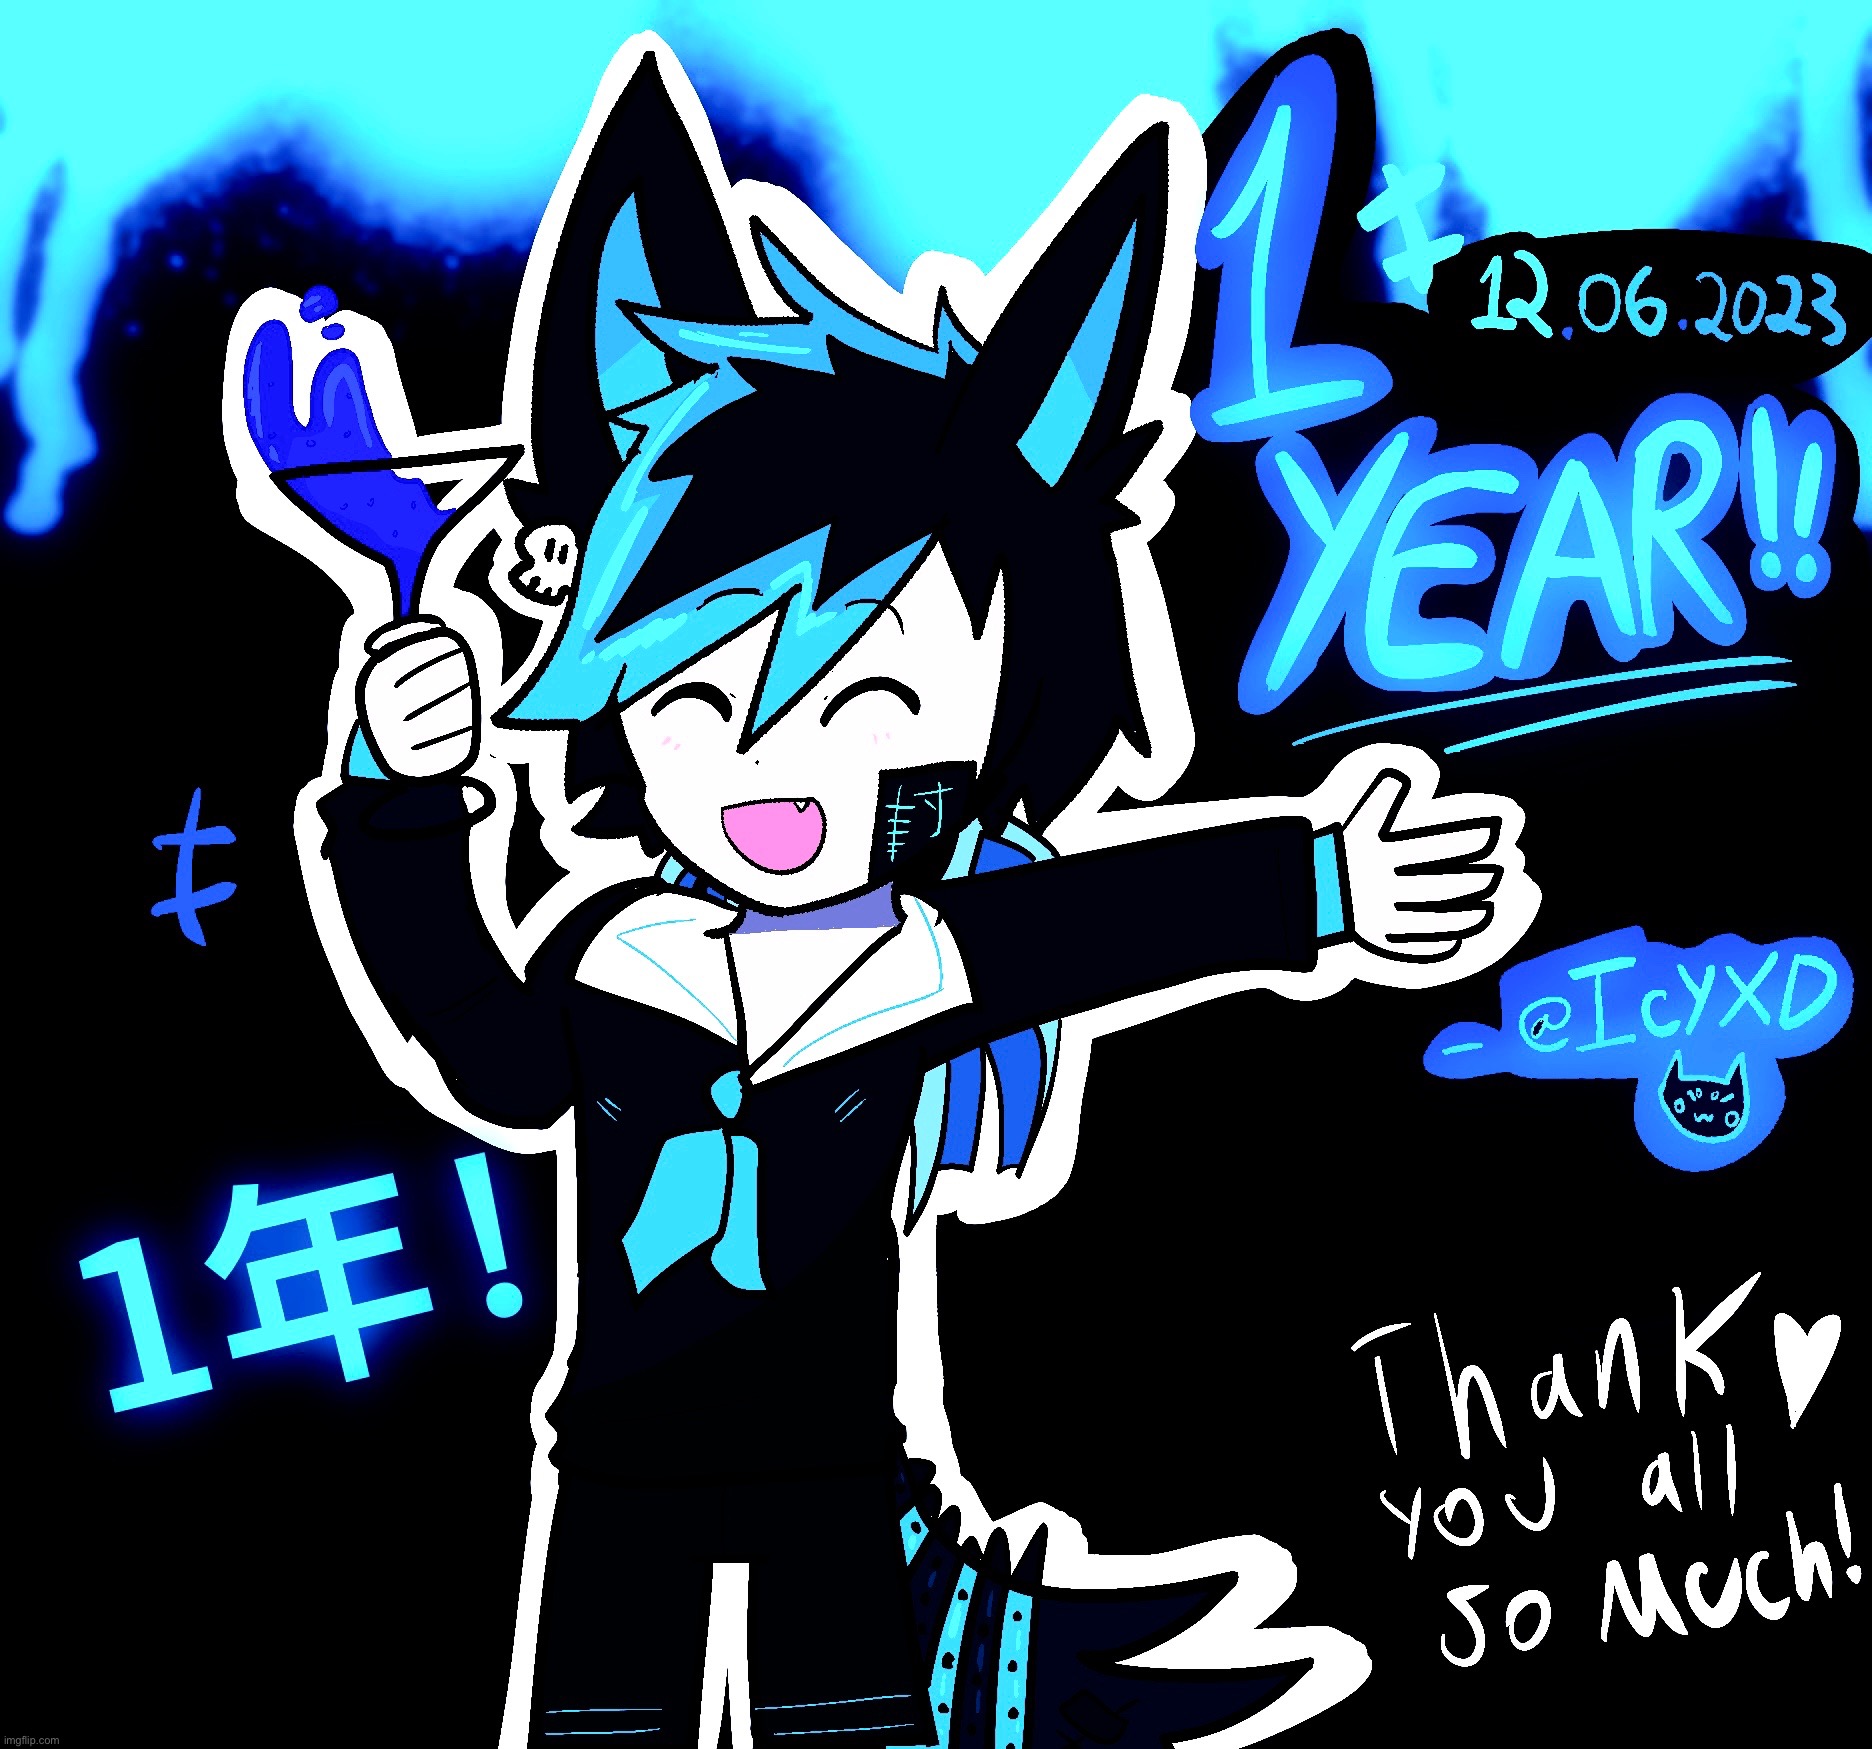 ONE-YEAR ANNIVERSARY. THANK YOU ALL SO MUCH! | image tagged in anniversary,thank you | made w/ Imgflip meme maker